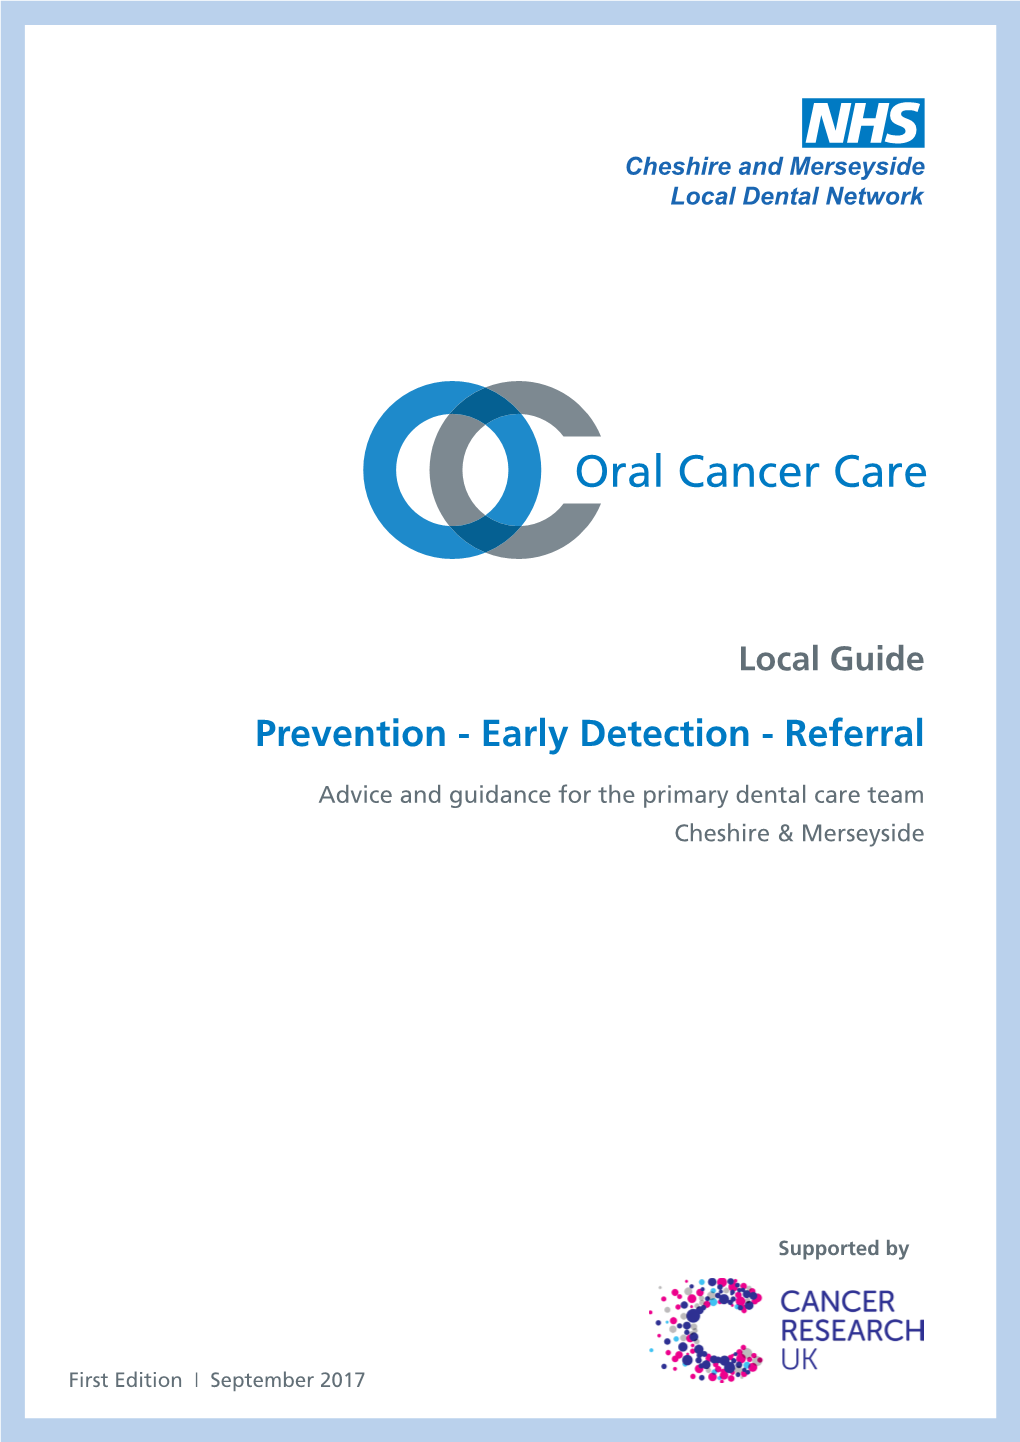 Oral Cancer Is on the Increase Both Nationally and Locally